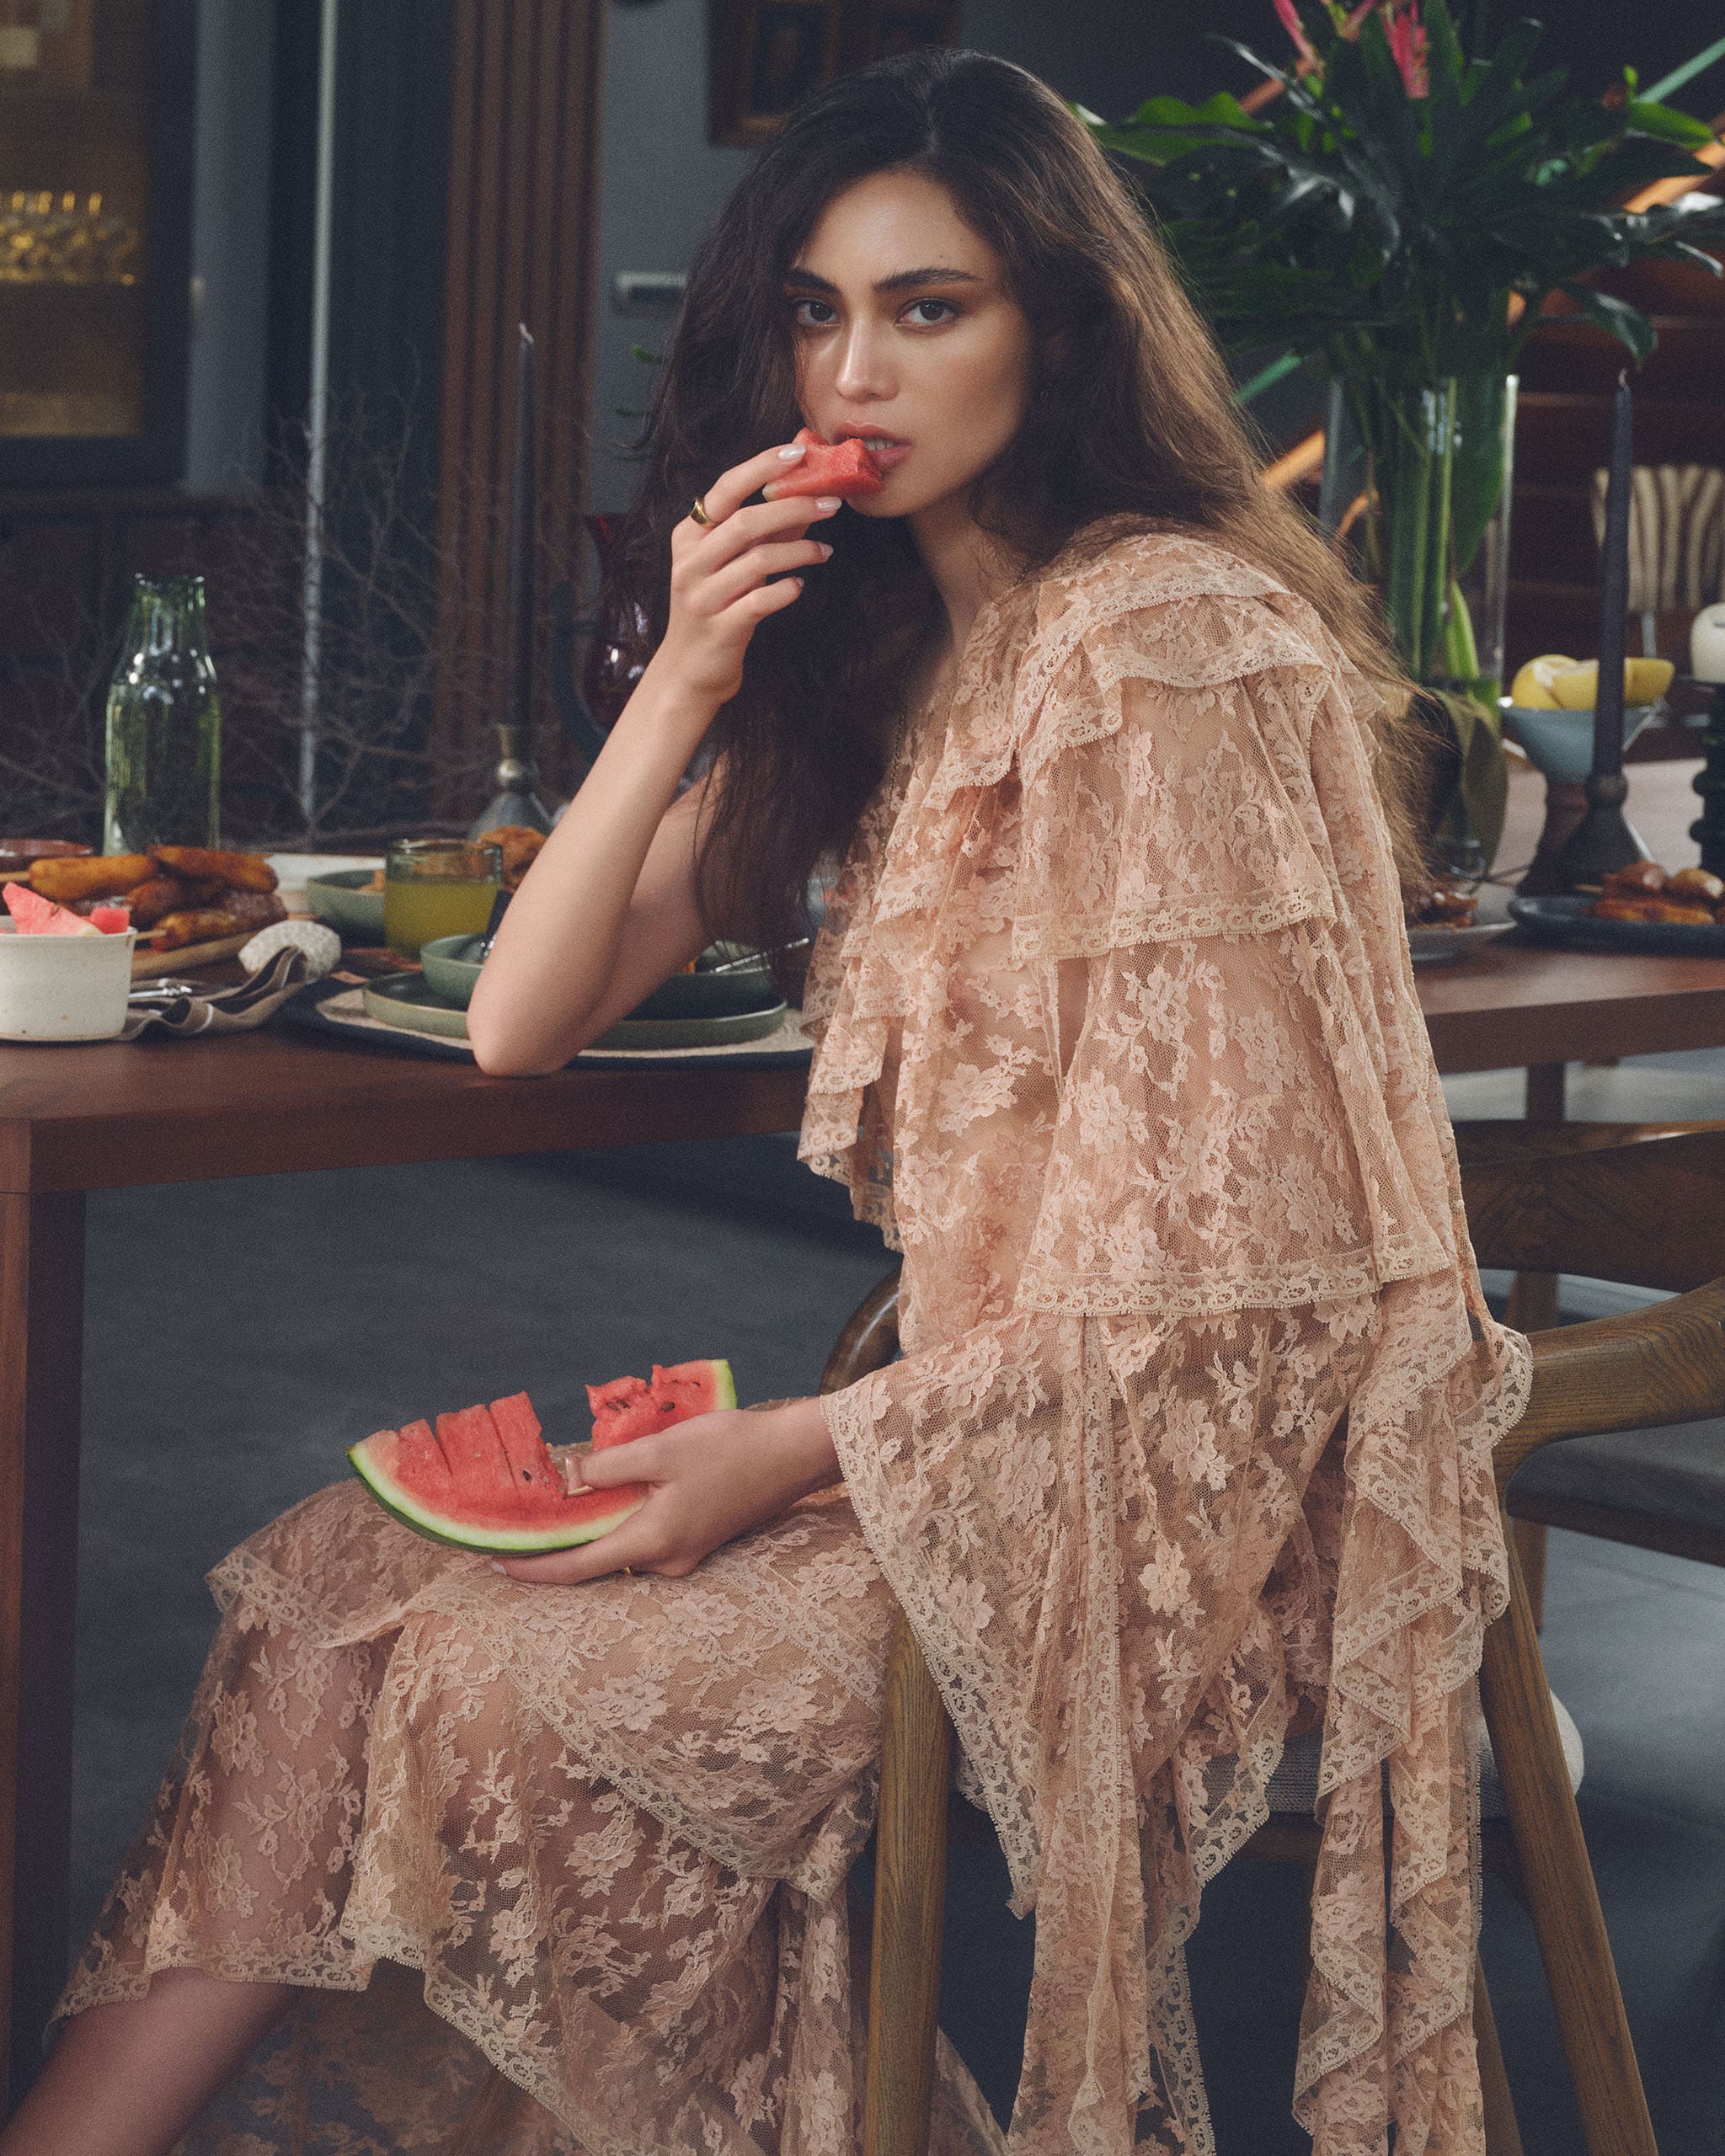 a girl wearing a lacy peach dress while eating watermelon